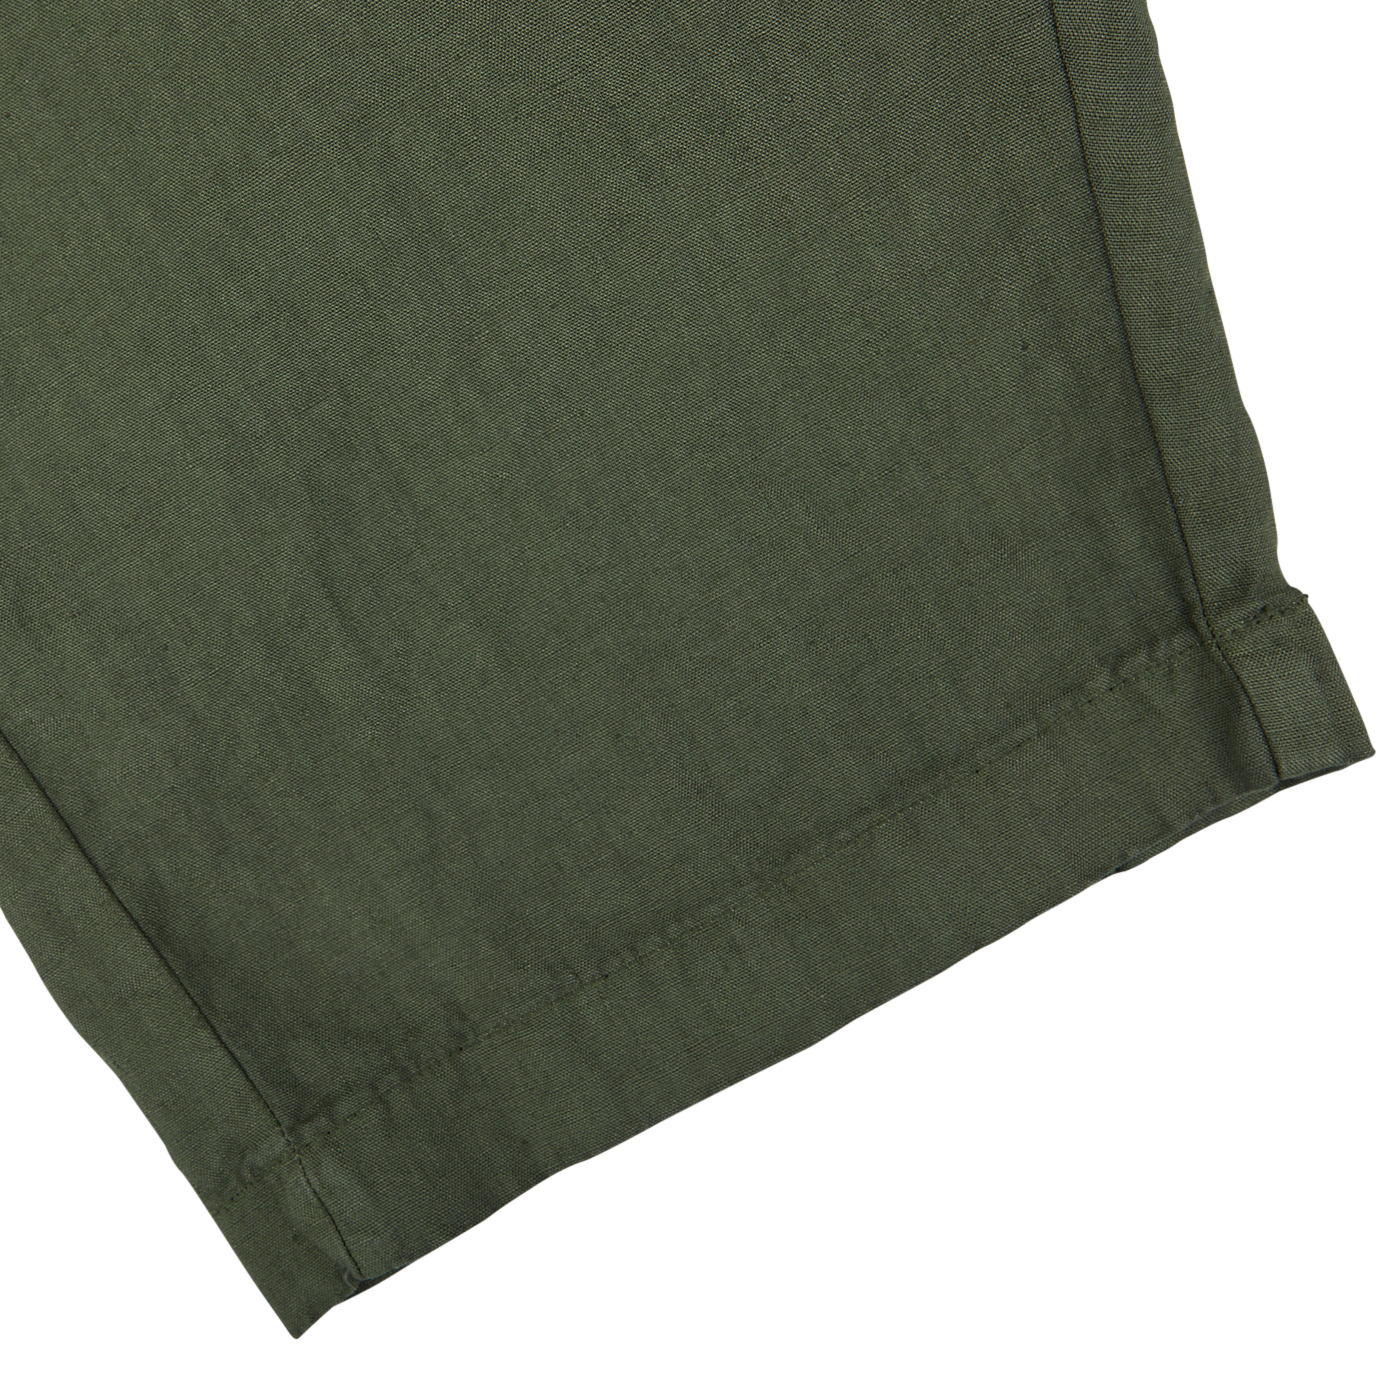 Pure linen fabric in militare green with a hem on a white background.
Product Name: Berwich Militare Green Washed Linen Drawstring Shorts